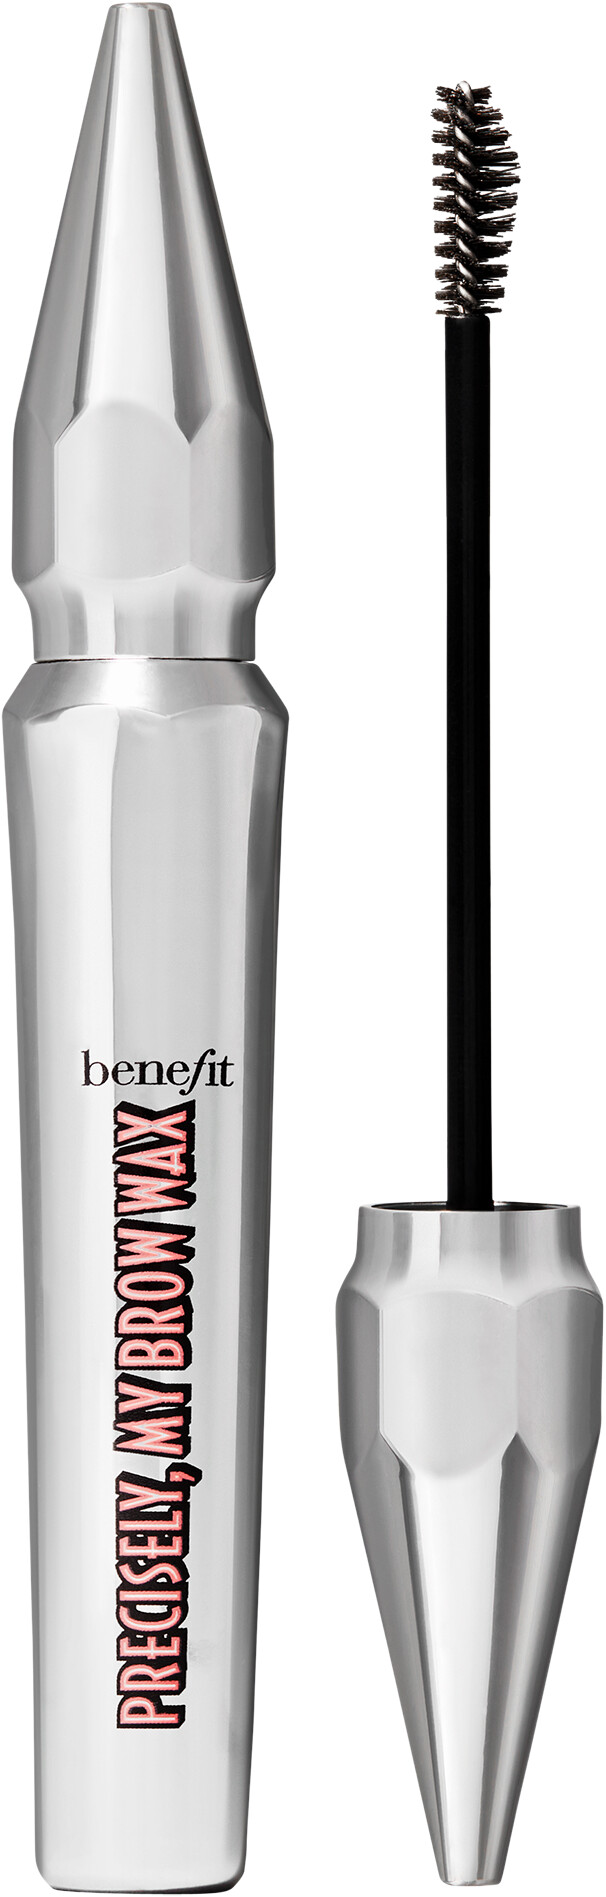 Benefit Precisely, My Brow Wax Full-Pigment Sculpting Brow Wax 5g 5 - Warm Black-Brown